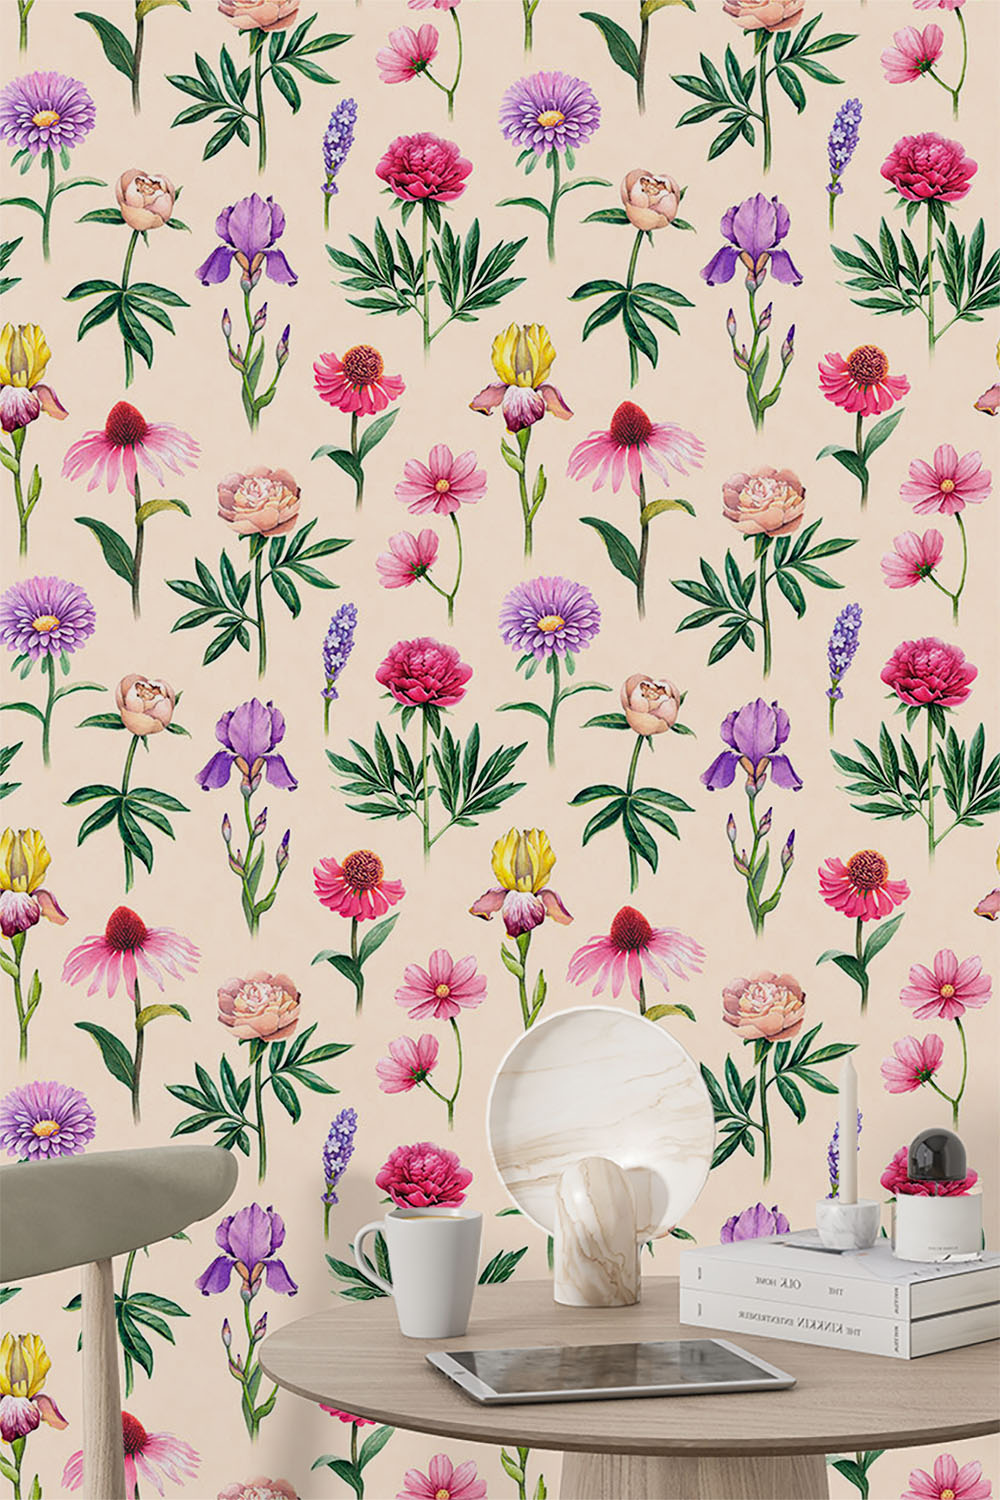 different-flowers-with-stem-and-leaf-wallpaper-sample